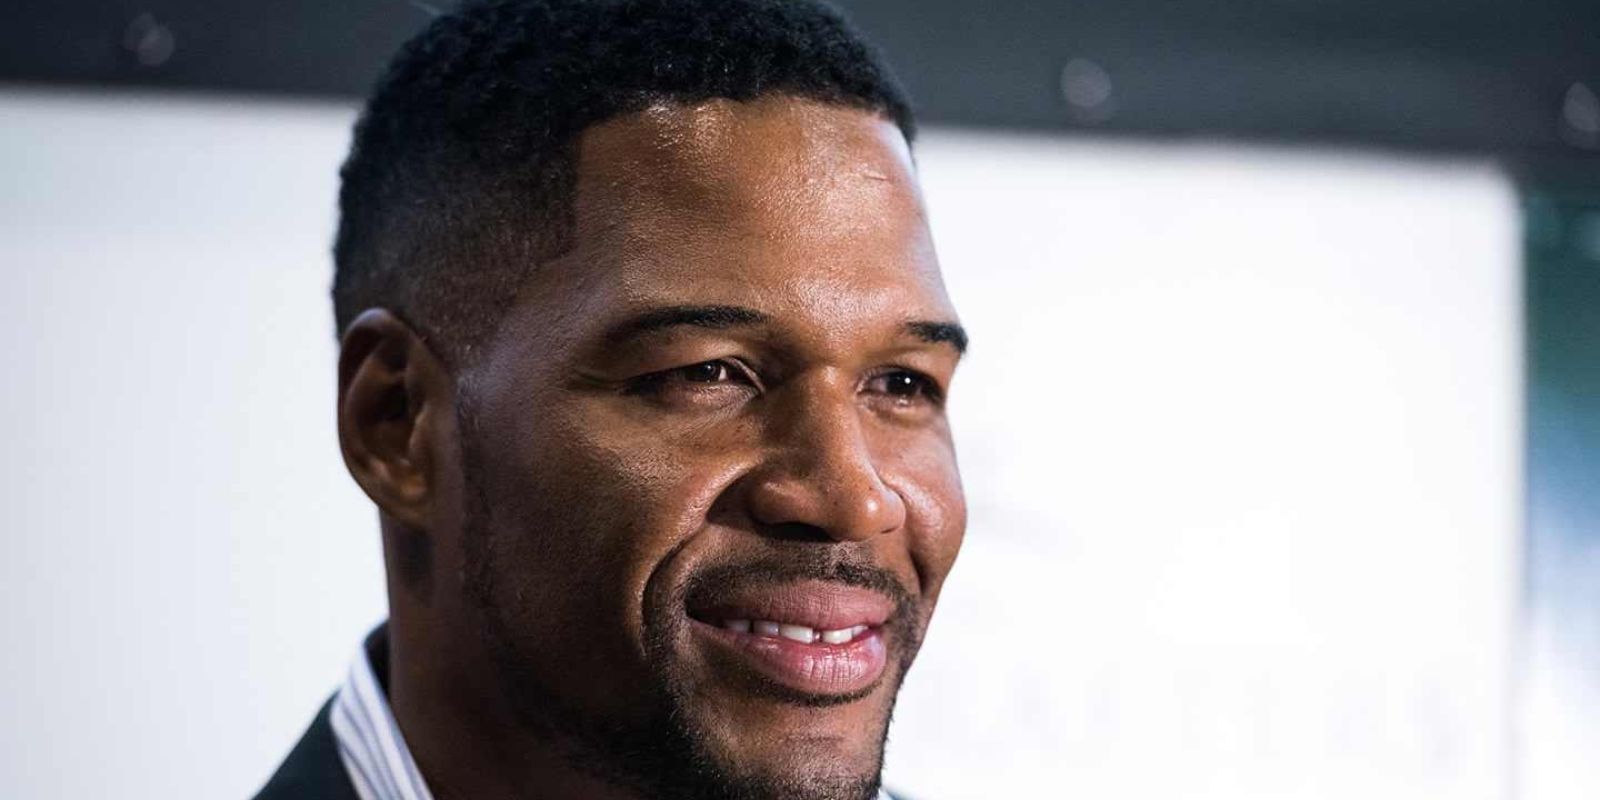 Michael Strahan smiling for a photograph